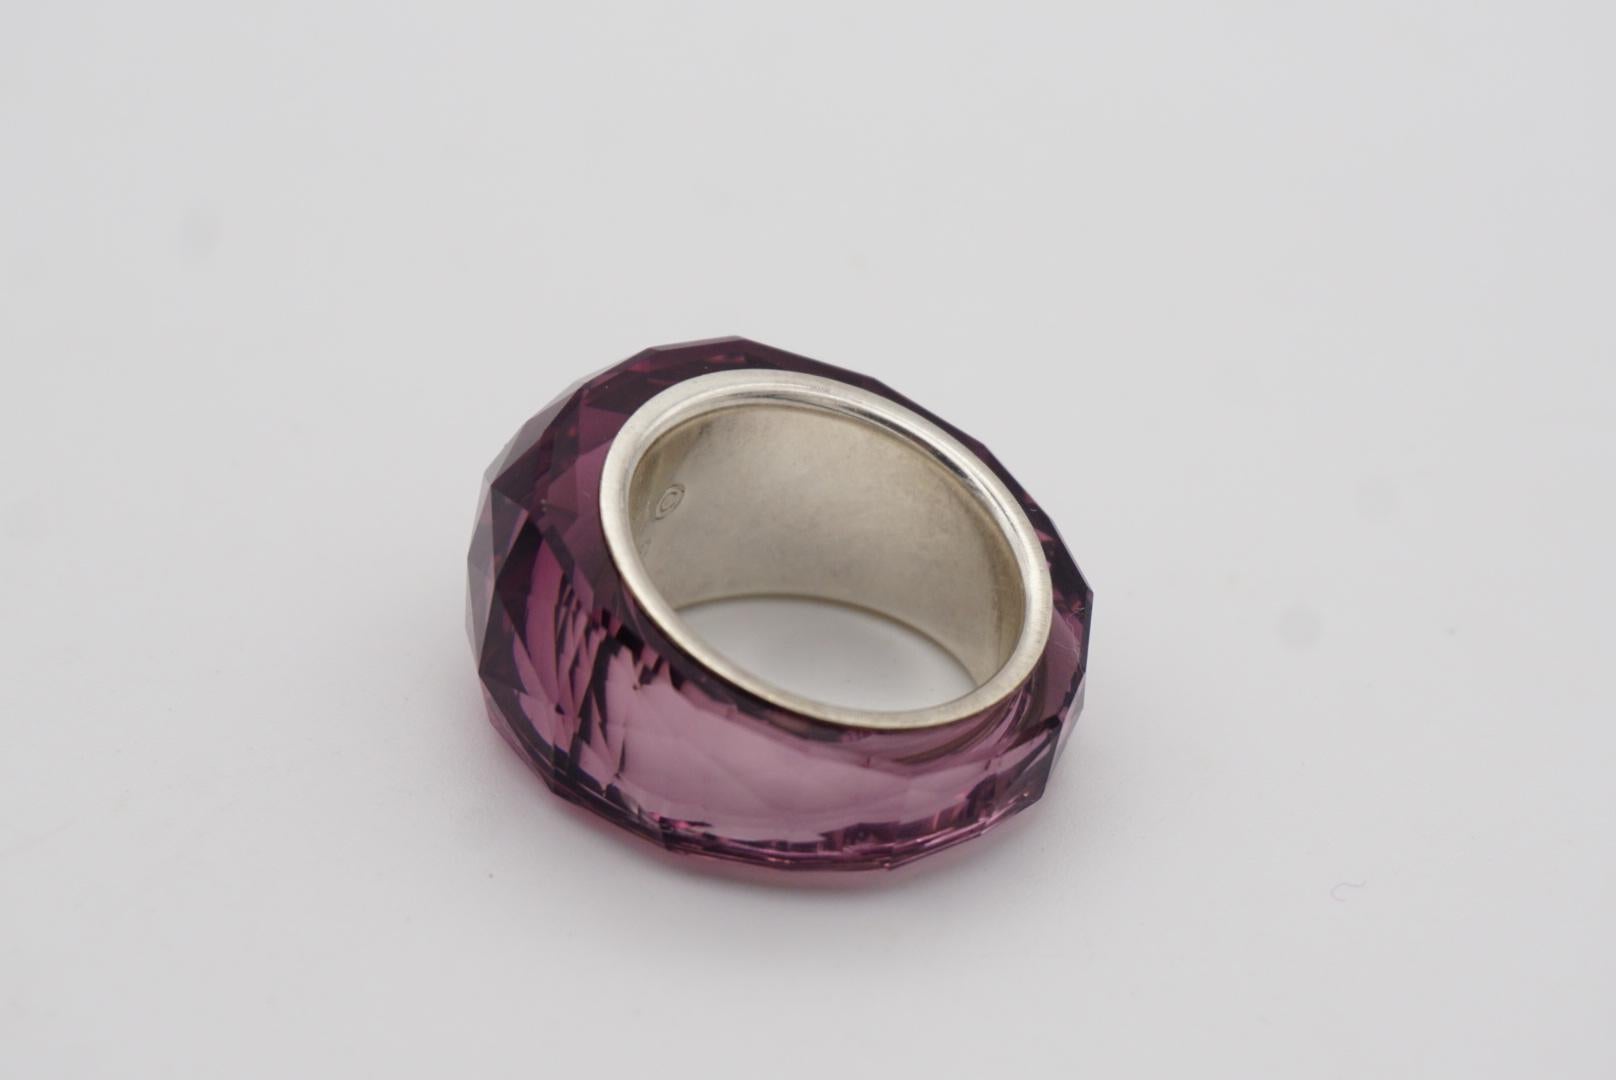 Swarovski Nirvana Cocktail Fully Cut Purple Petite Small Ring, Silver Plated, 52 For Sale 3